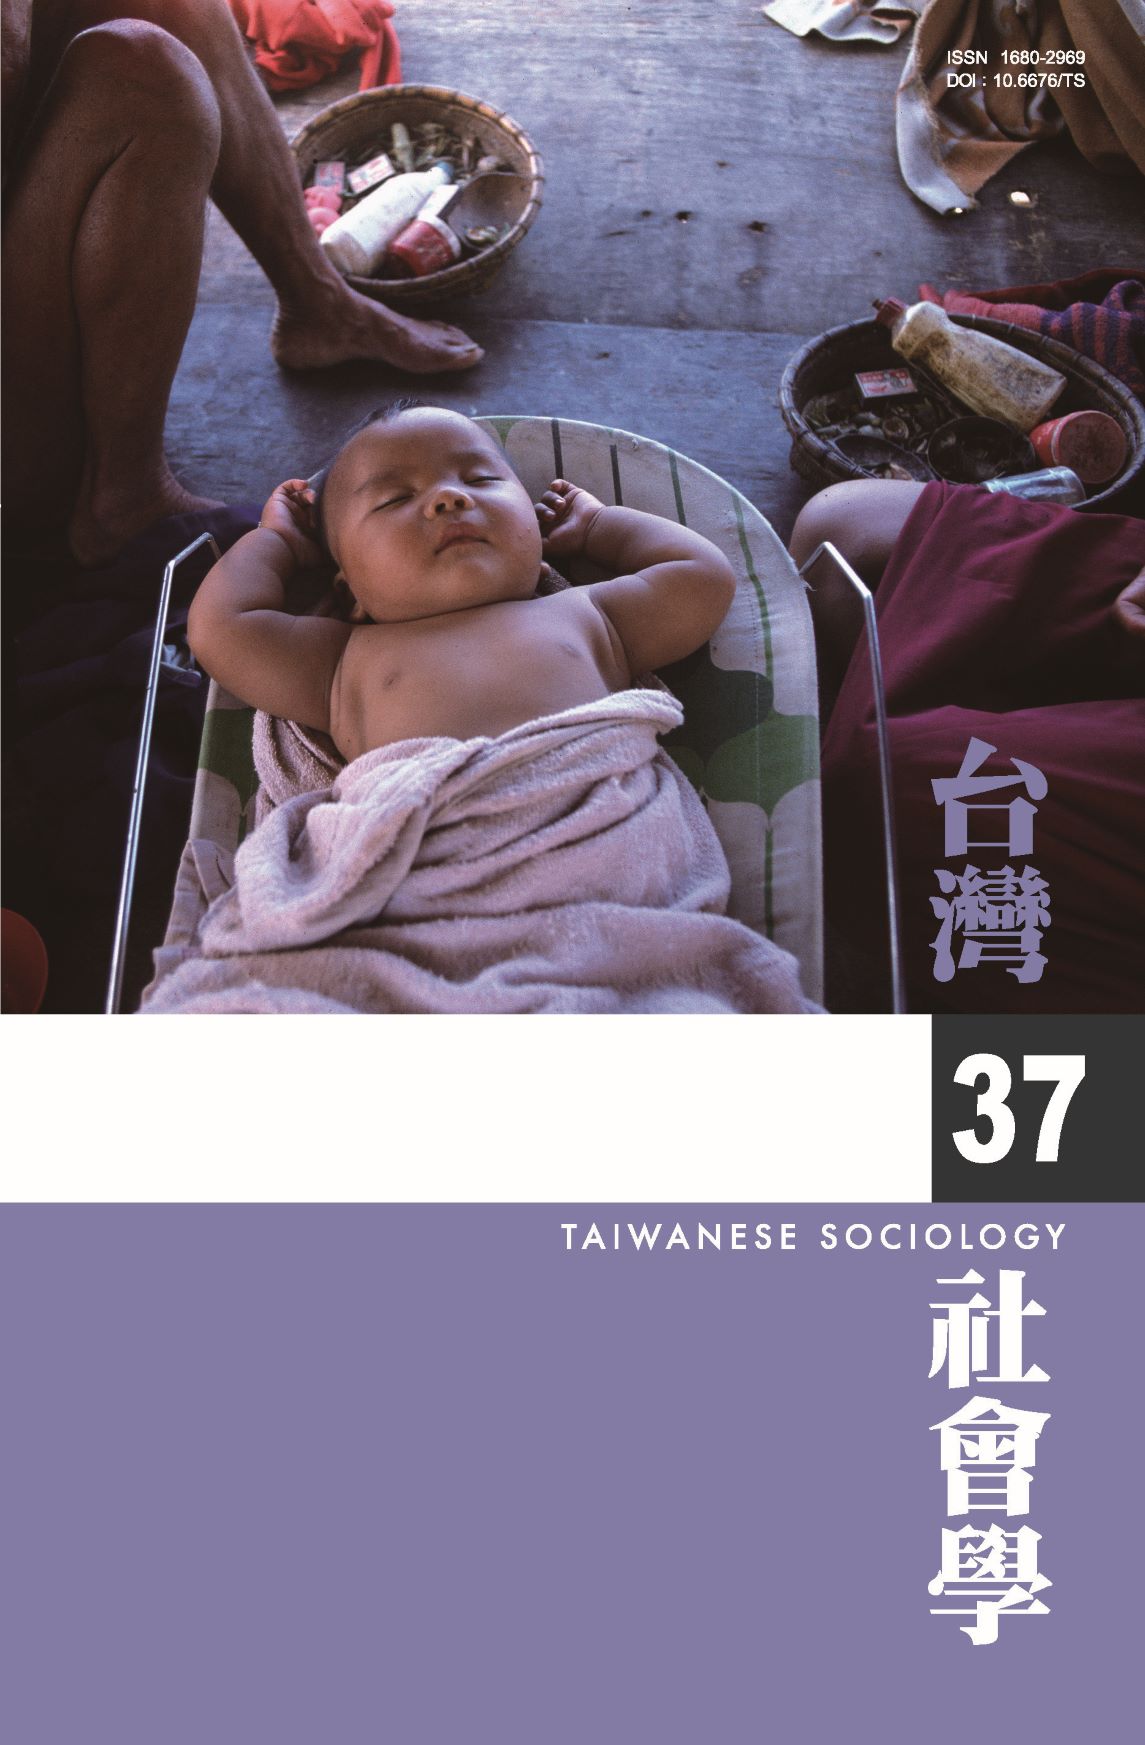 Taiwanese Sociology No. 37 is now available